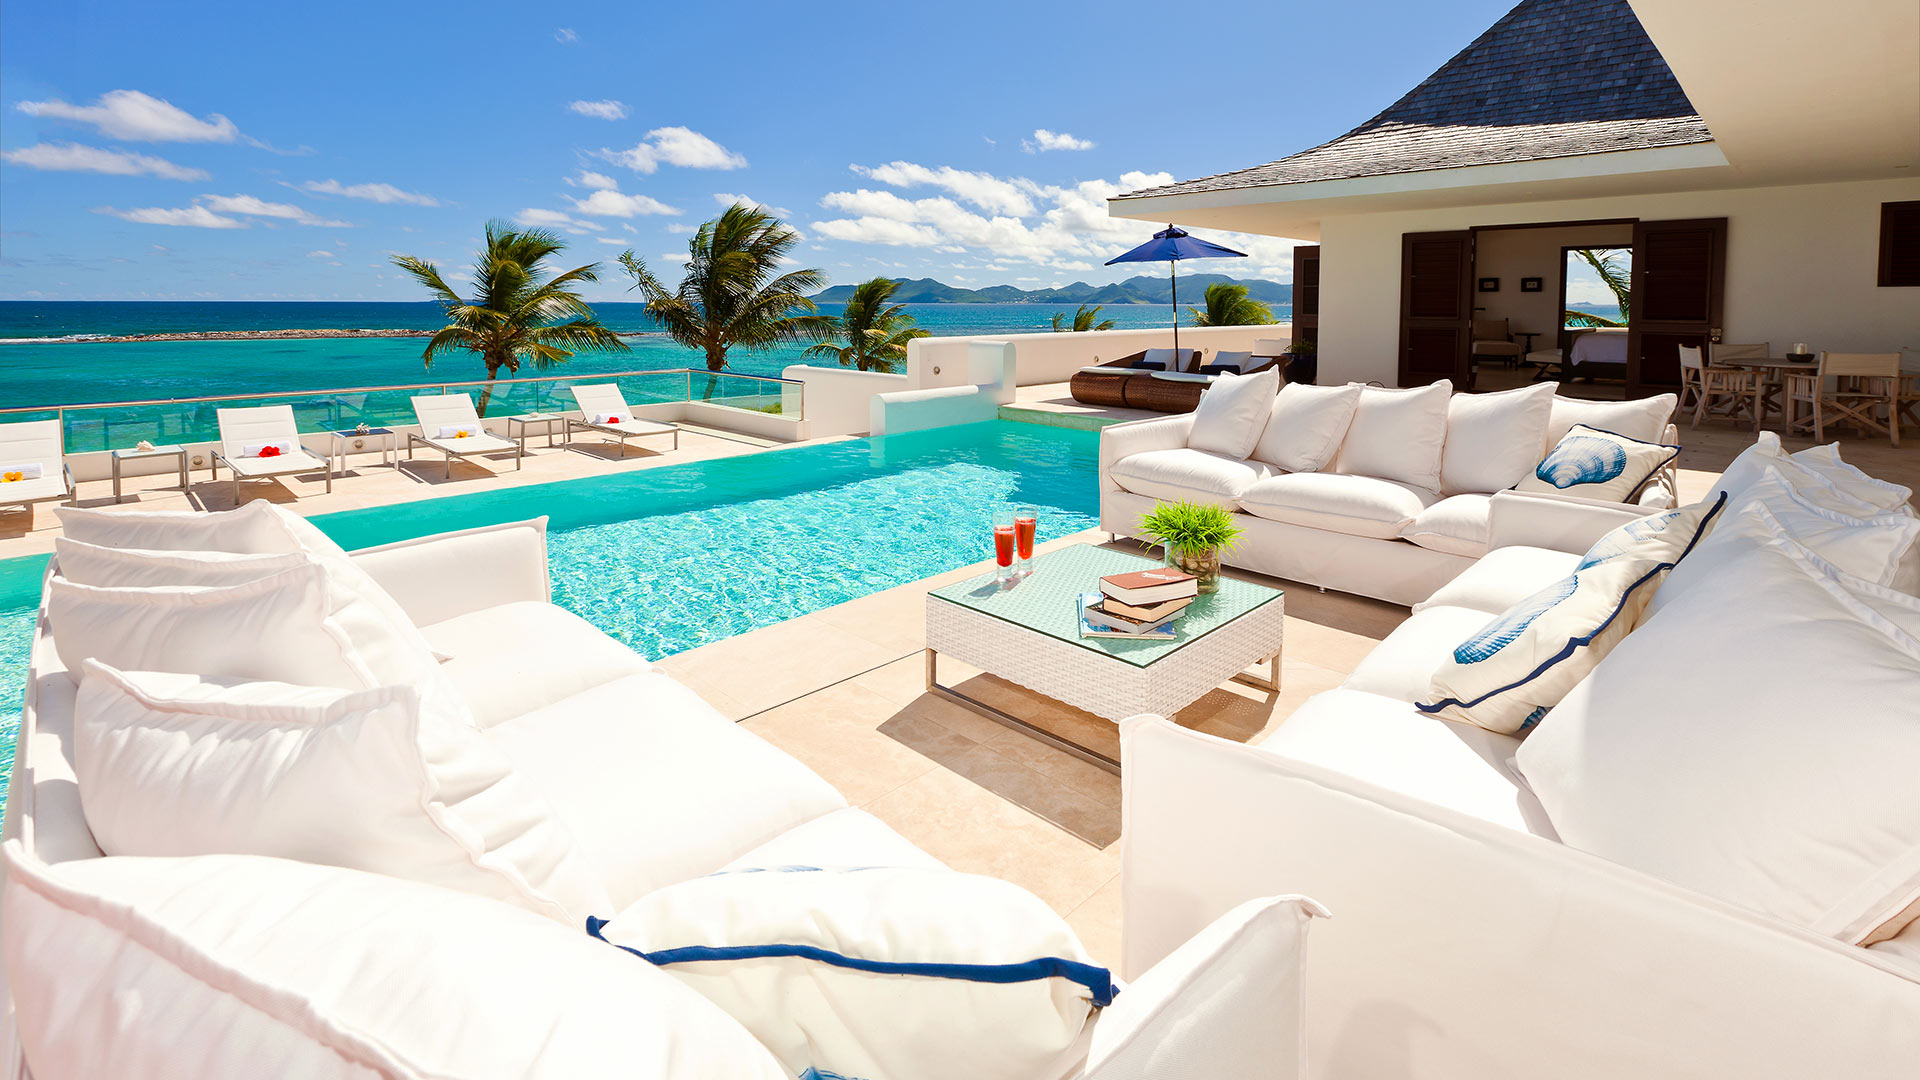 Plush furnishings, even by the pool, allow guest to experience ultimate relaxation and rejuvenation at Le Bleu Villa on Anguilla.
